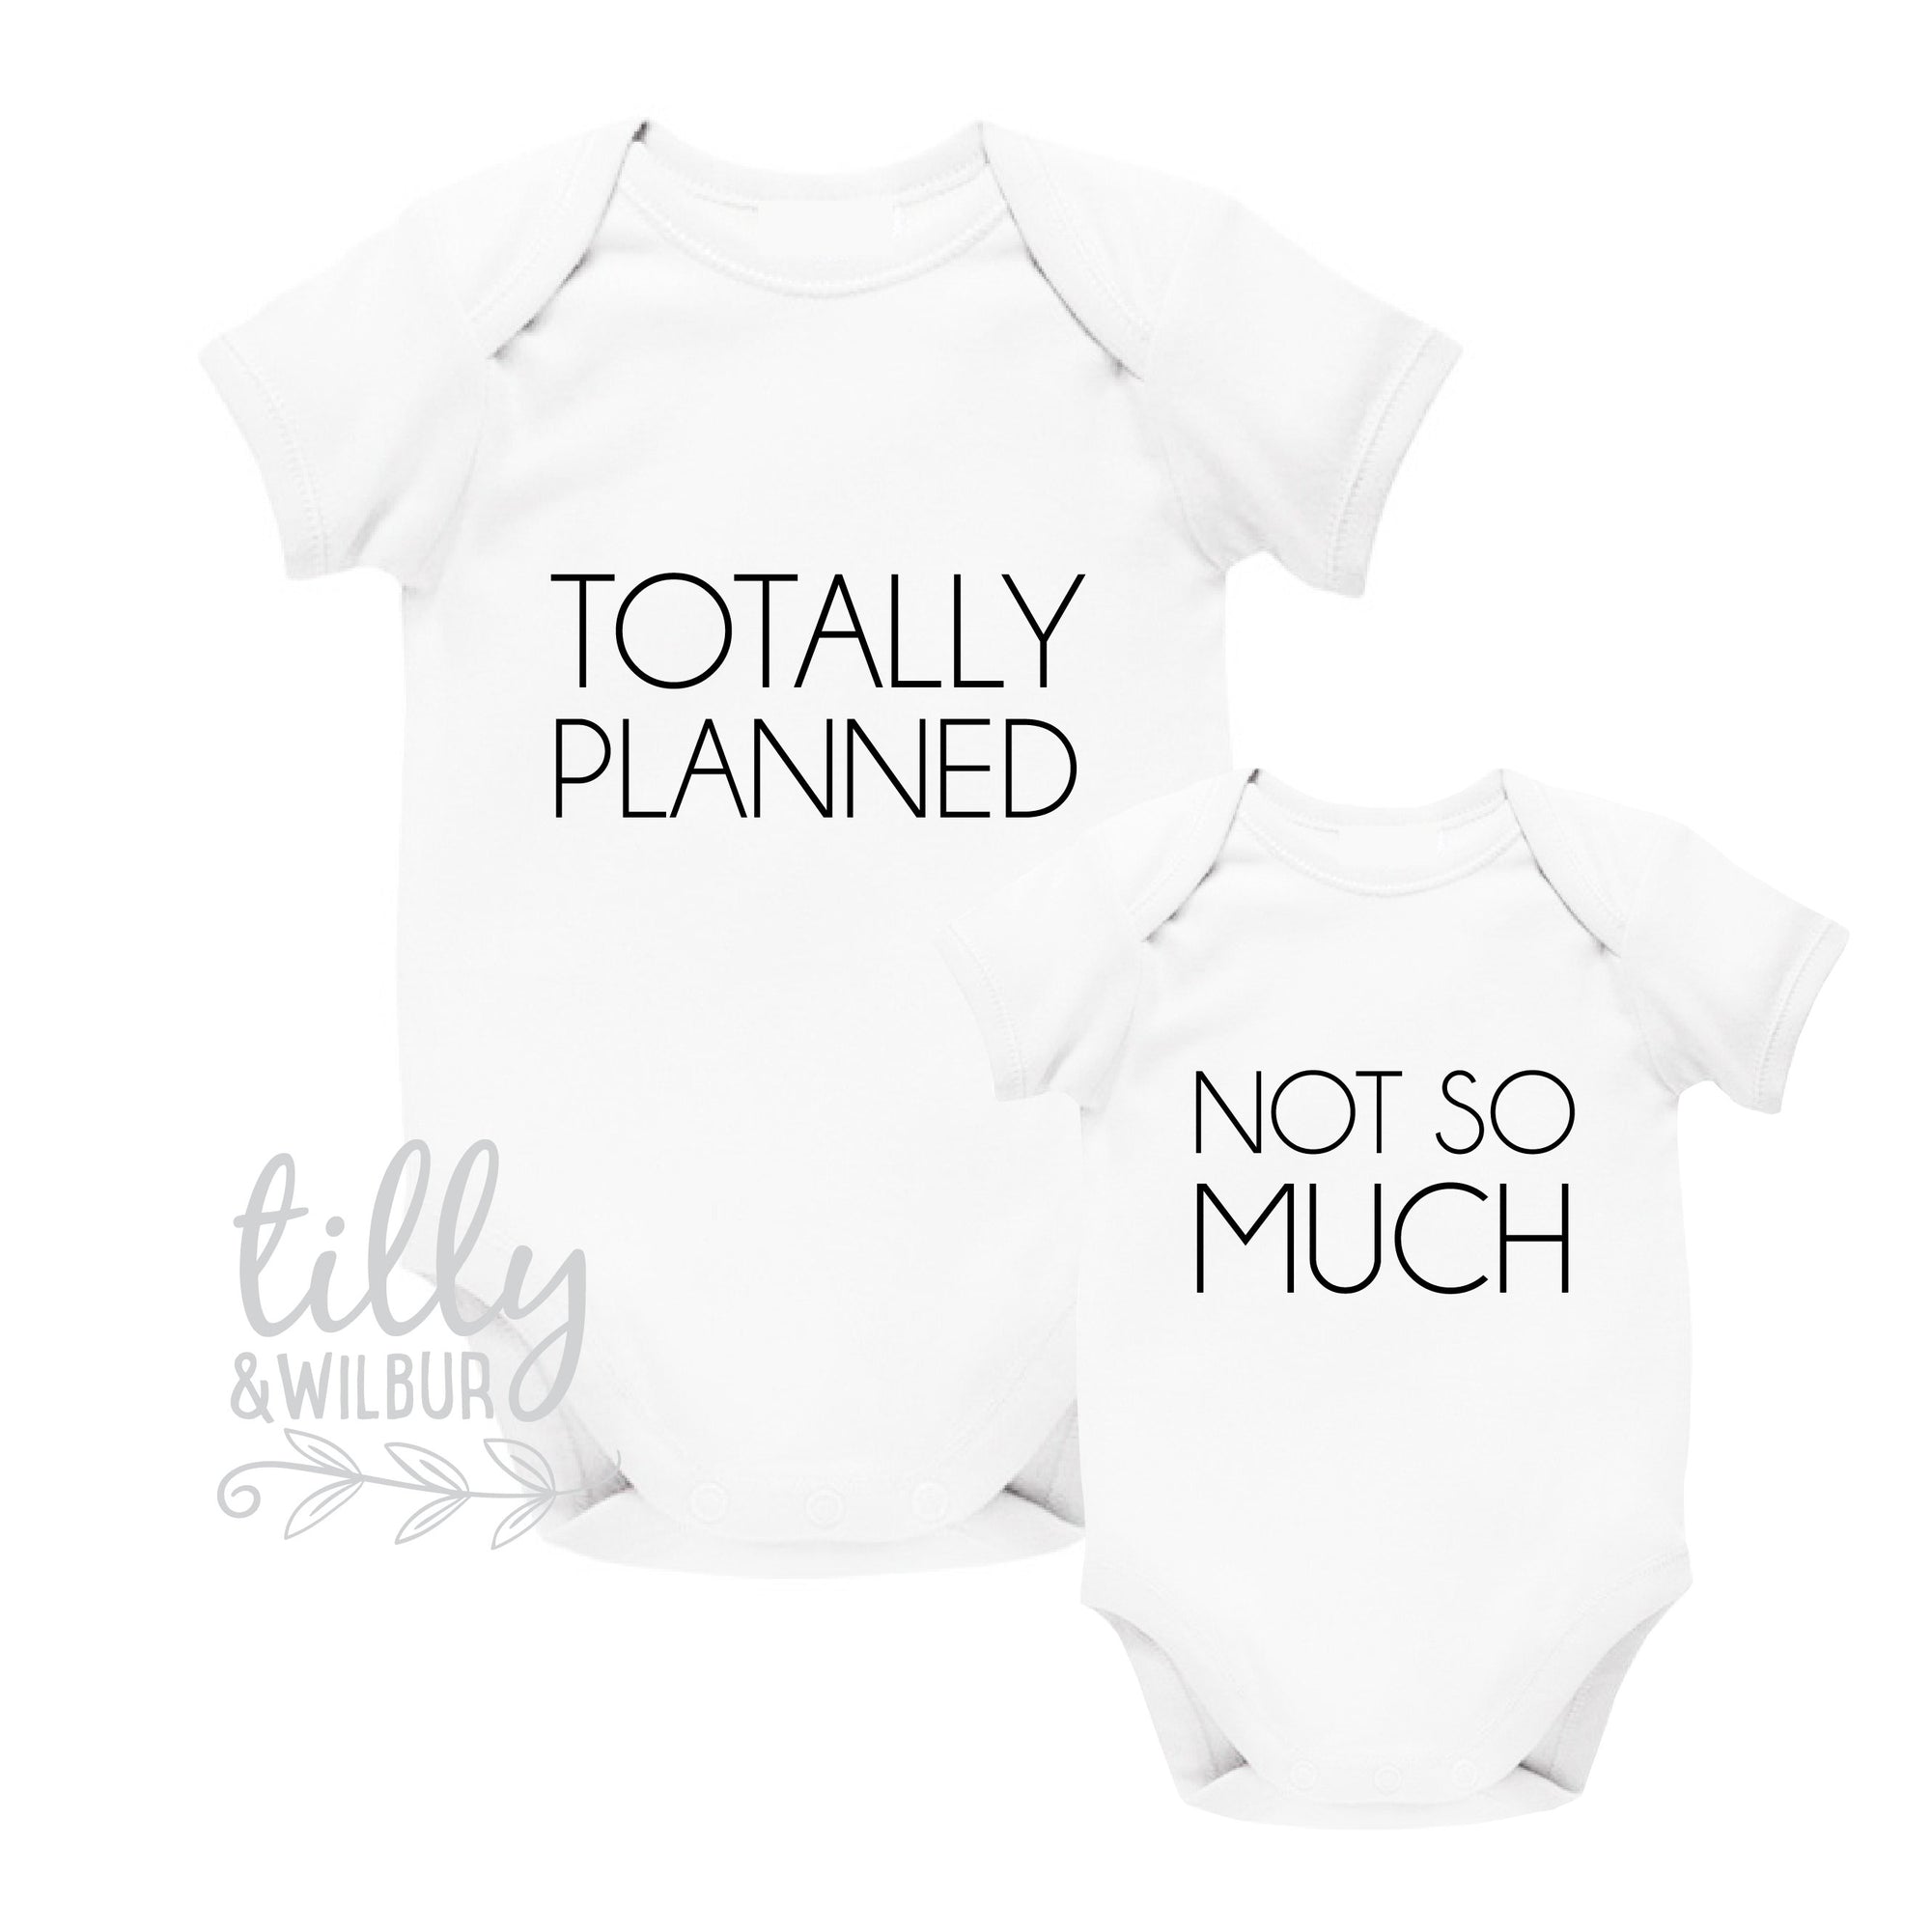 Totally Planned, Not So Much, Twin Bodysuits, Twin Baby Gift, Twins, Twin Baby Shower, Twin Pregnancy Announcement, Twinning, Twin Baby Gift